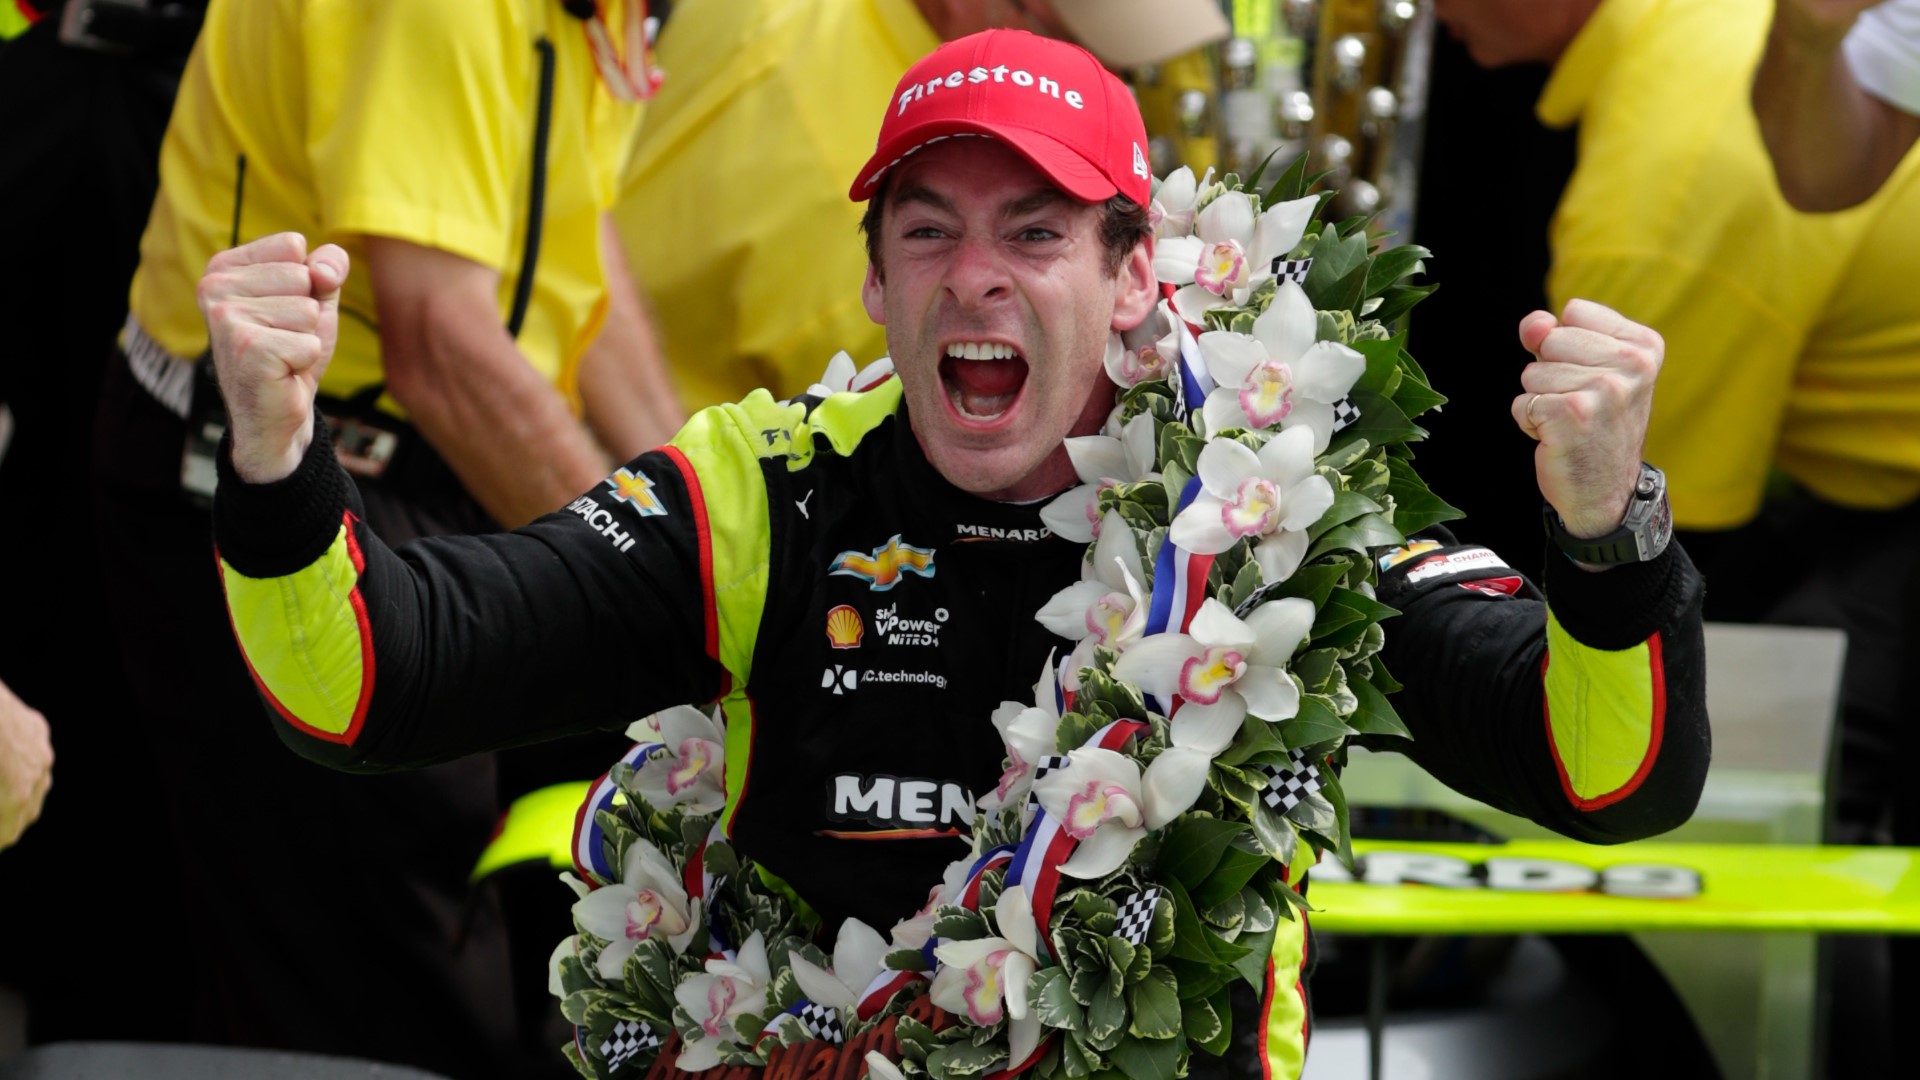 Before the 108th running of the Indy 500, Simon Pagenaud will drive a lap around IMS to honor 2003 winner Gil de Ferran, who died unexpectedly in 2023.